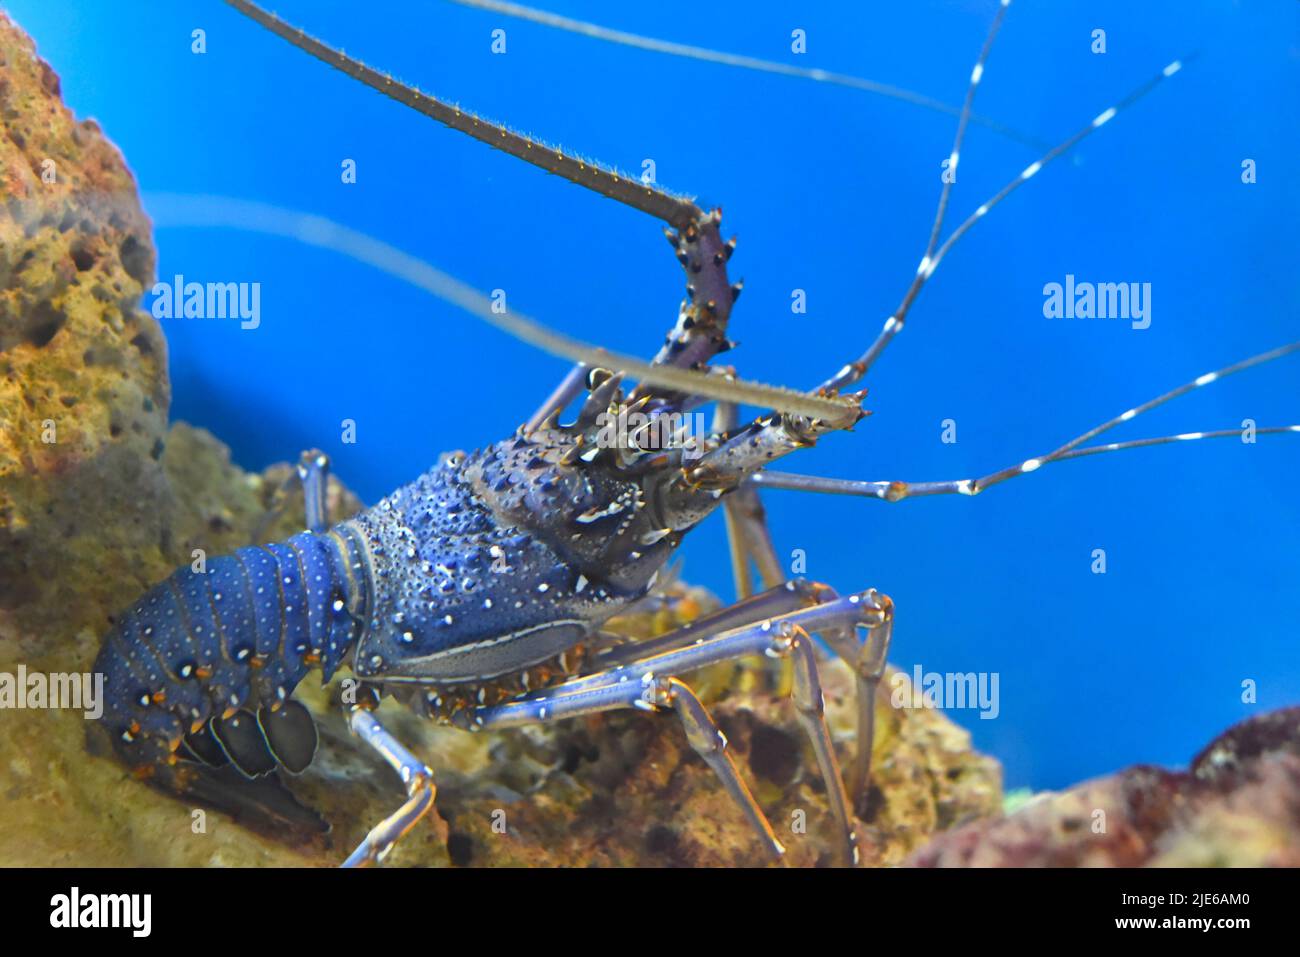 Spiny lobsters also known as langustas in aquarium Stock Photo